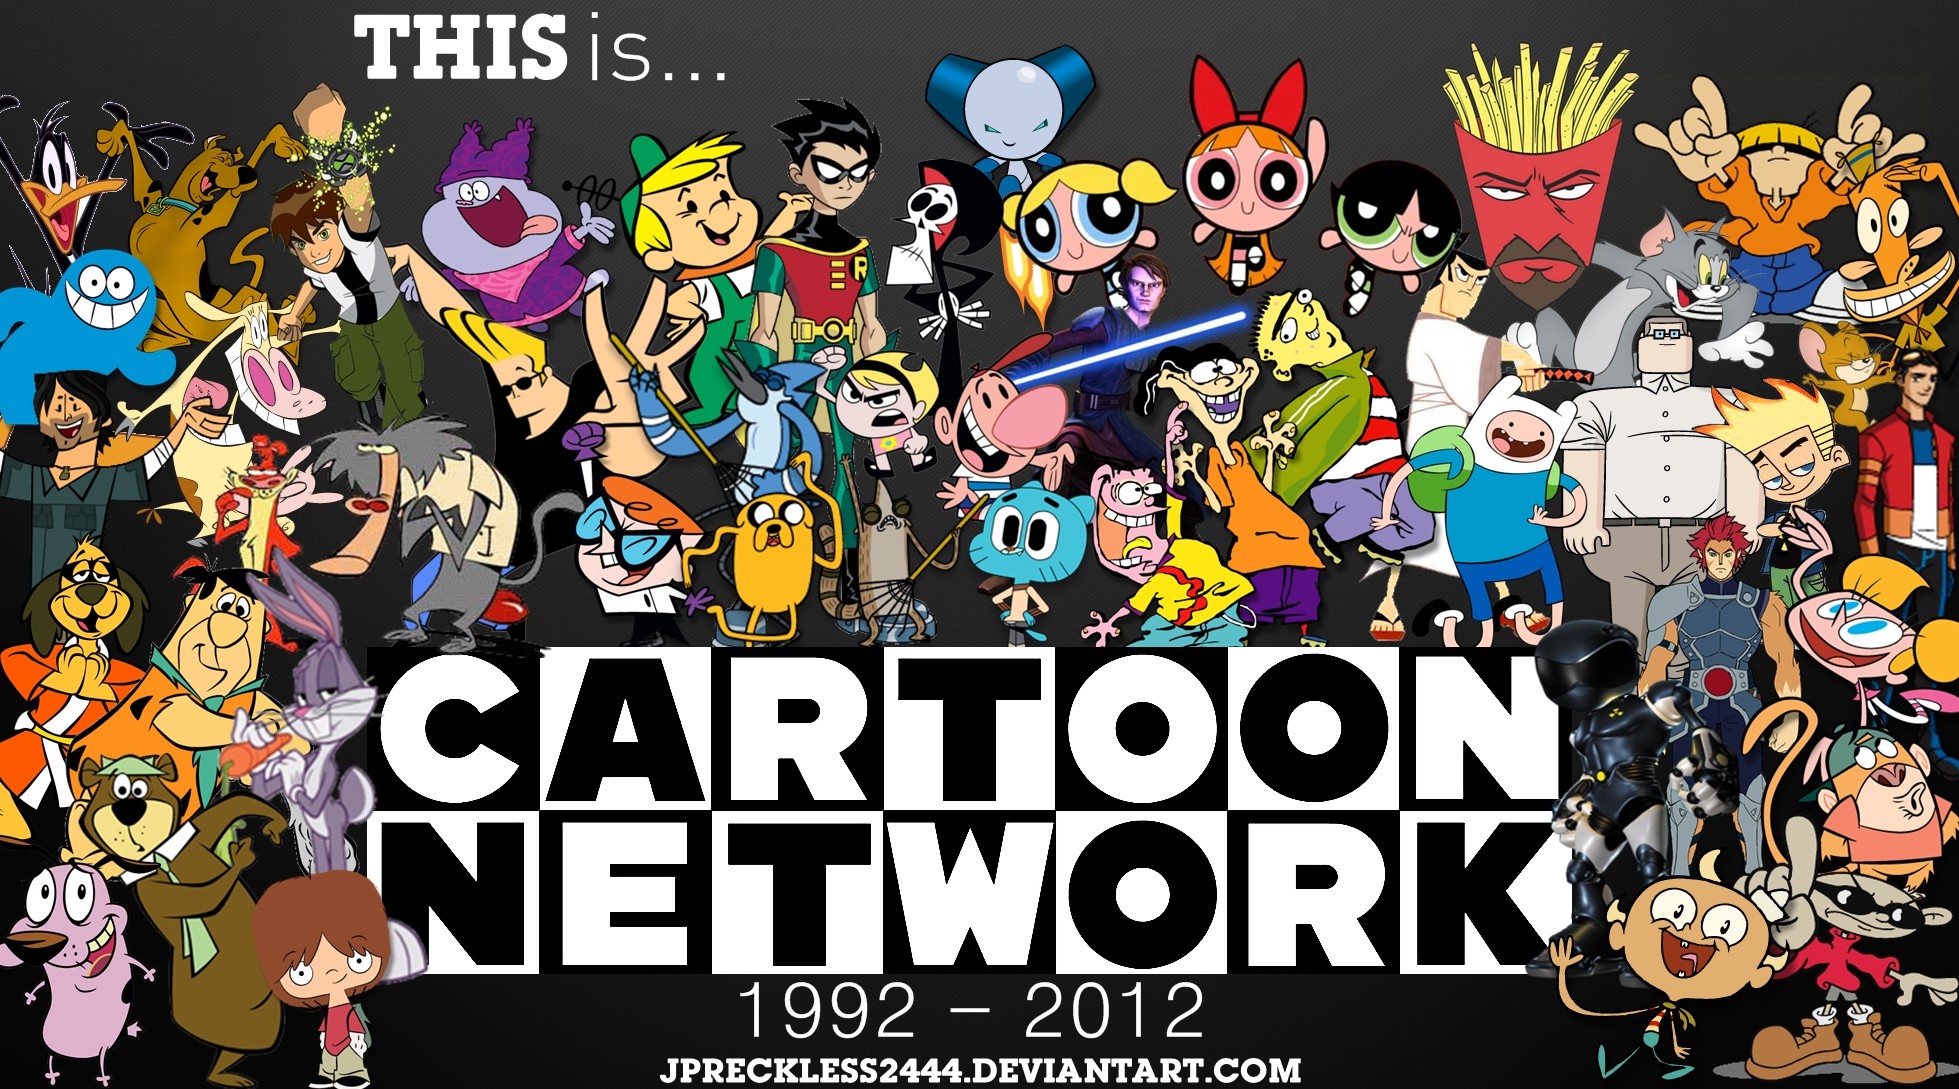 Miss the early Cartoon Network